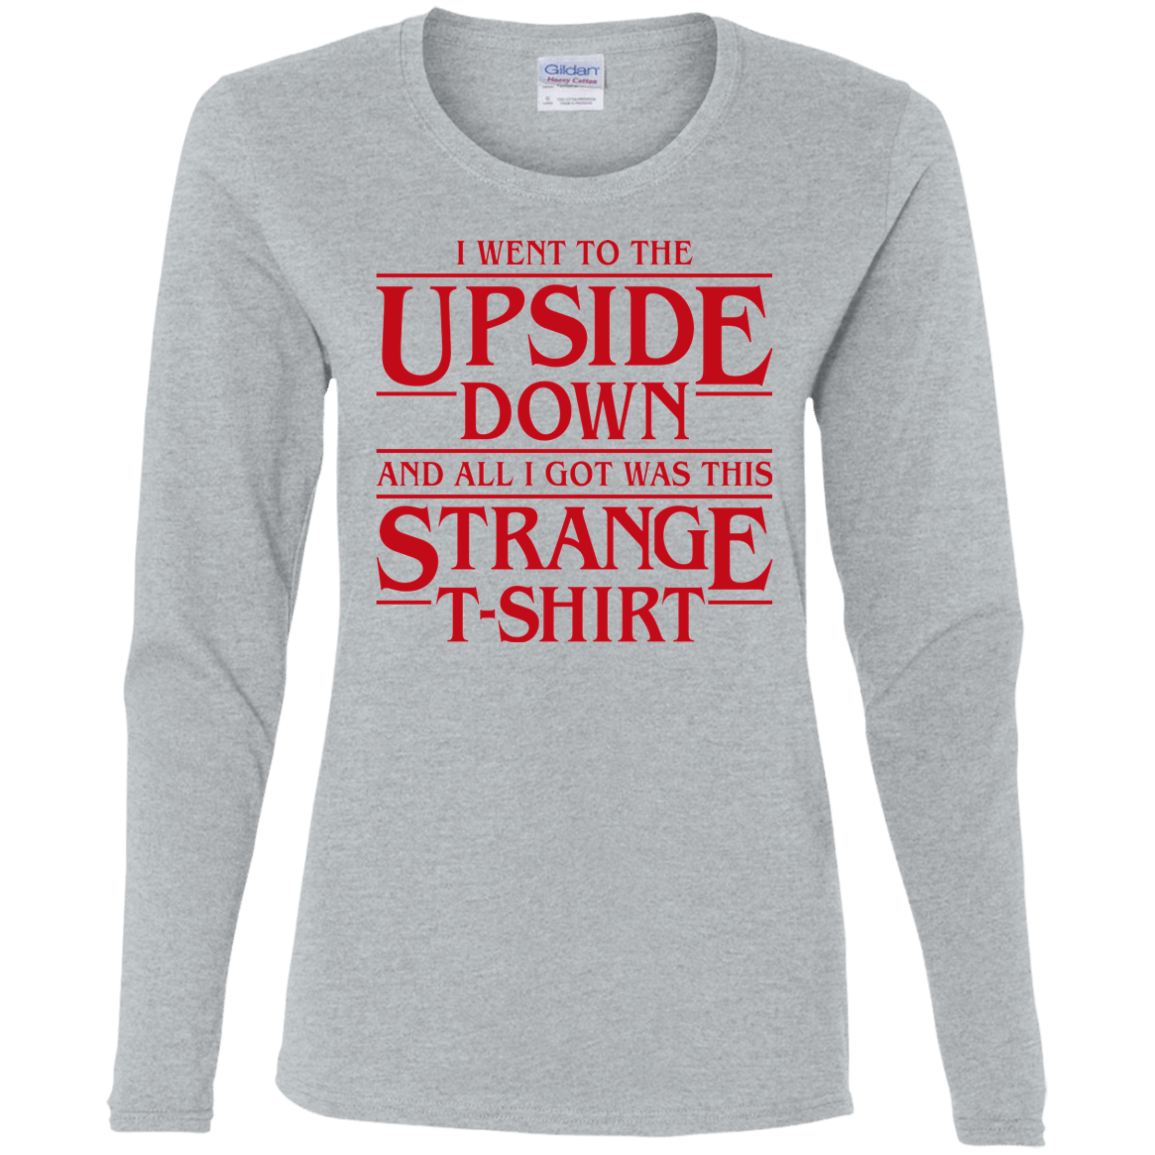 T-Shirts Sport Grey / S I Went to the Upside Down Women's Long Sleeve T-Shirt